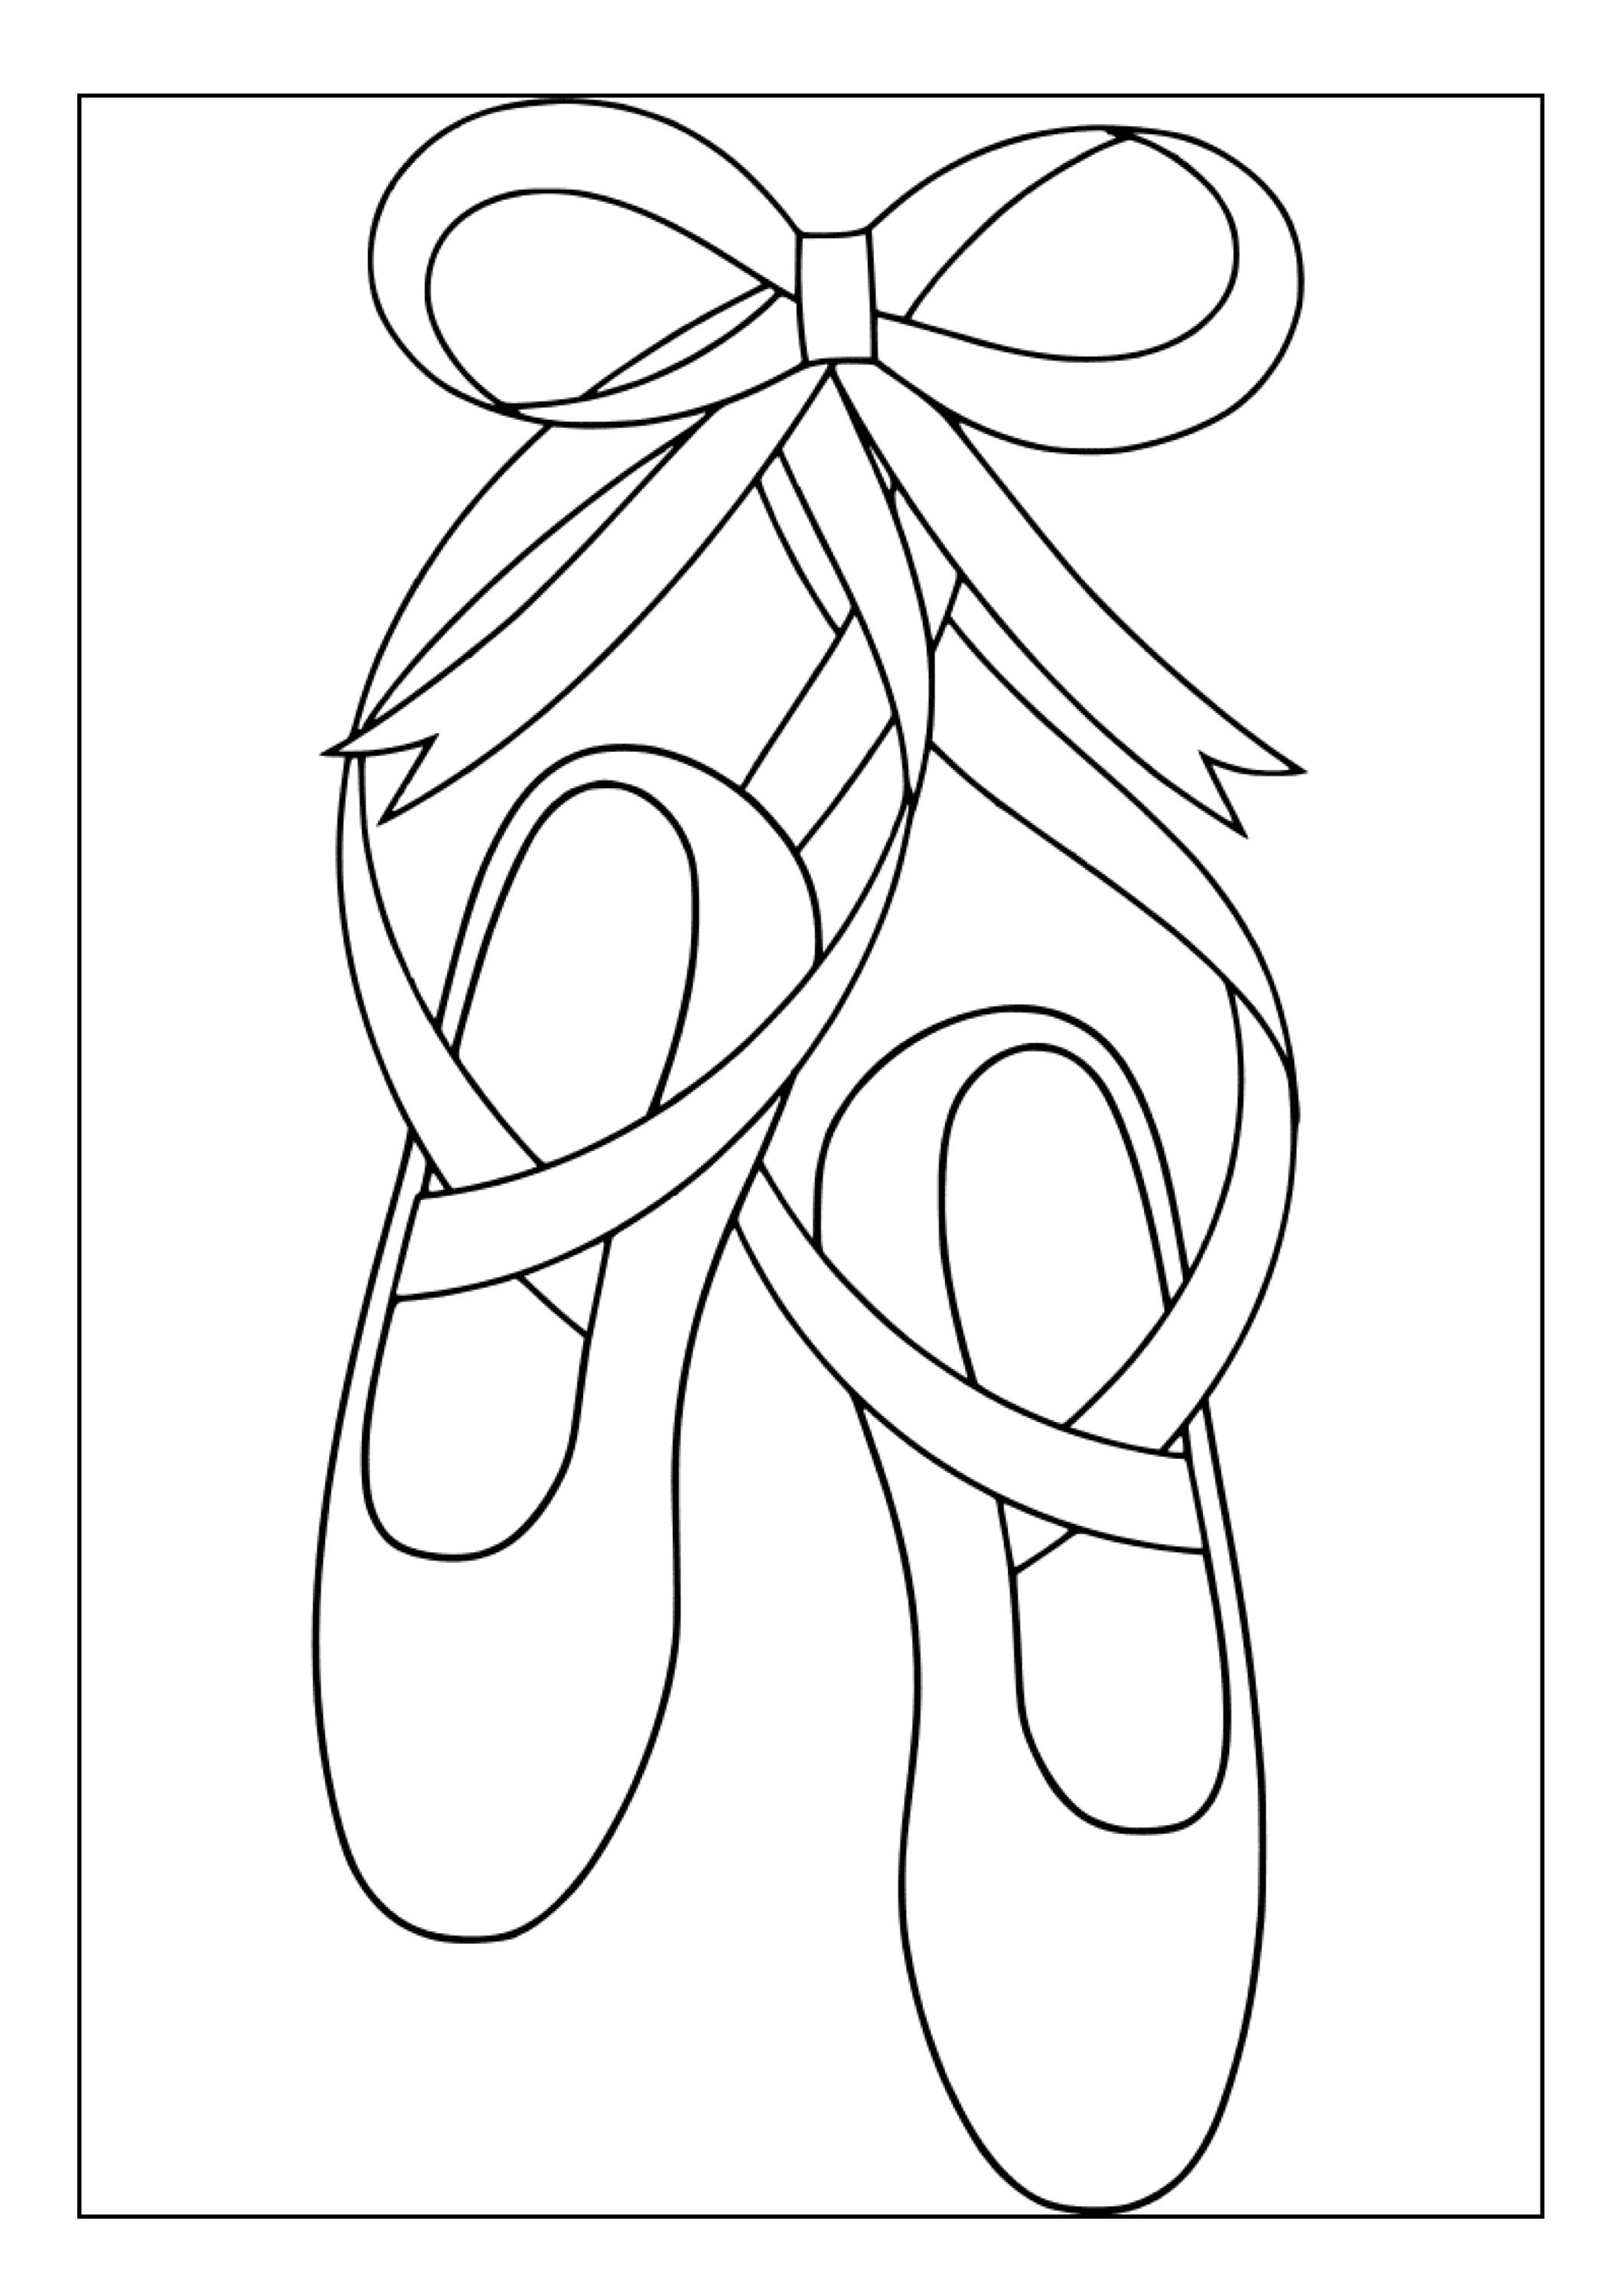 Printable Ballerina Coloring Pages for Kids and Adults 70 - Etsy